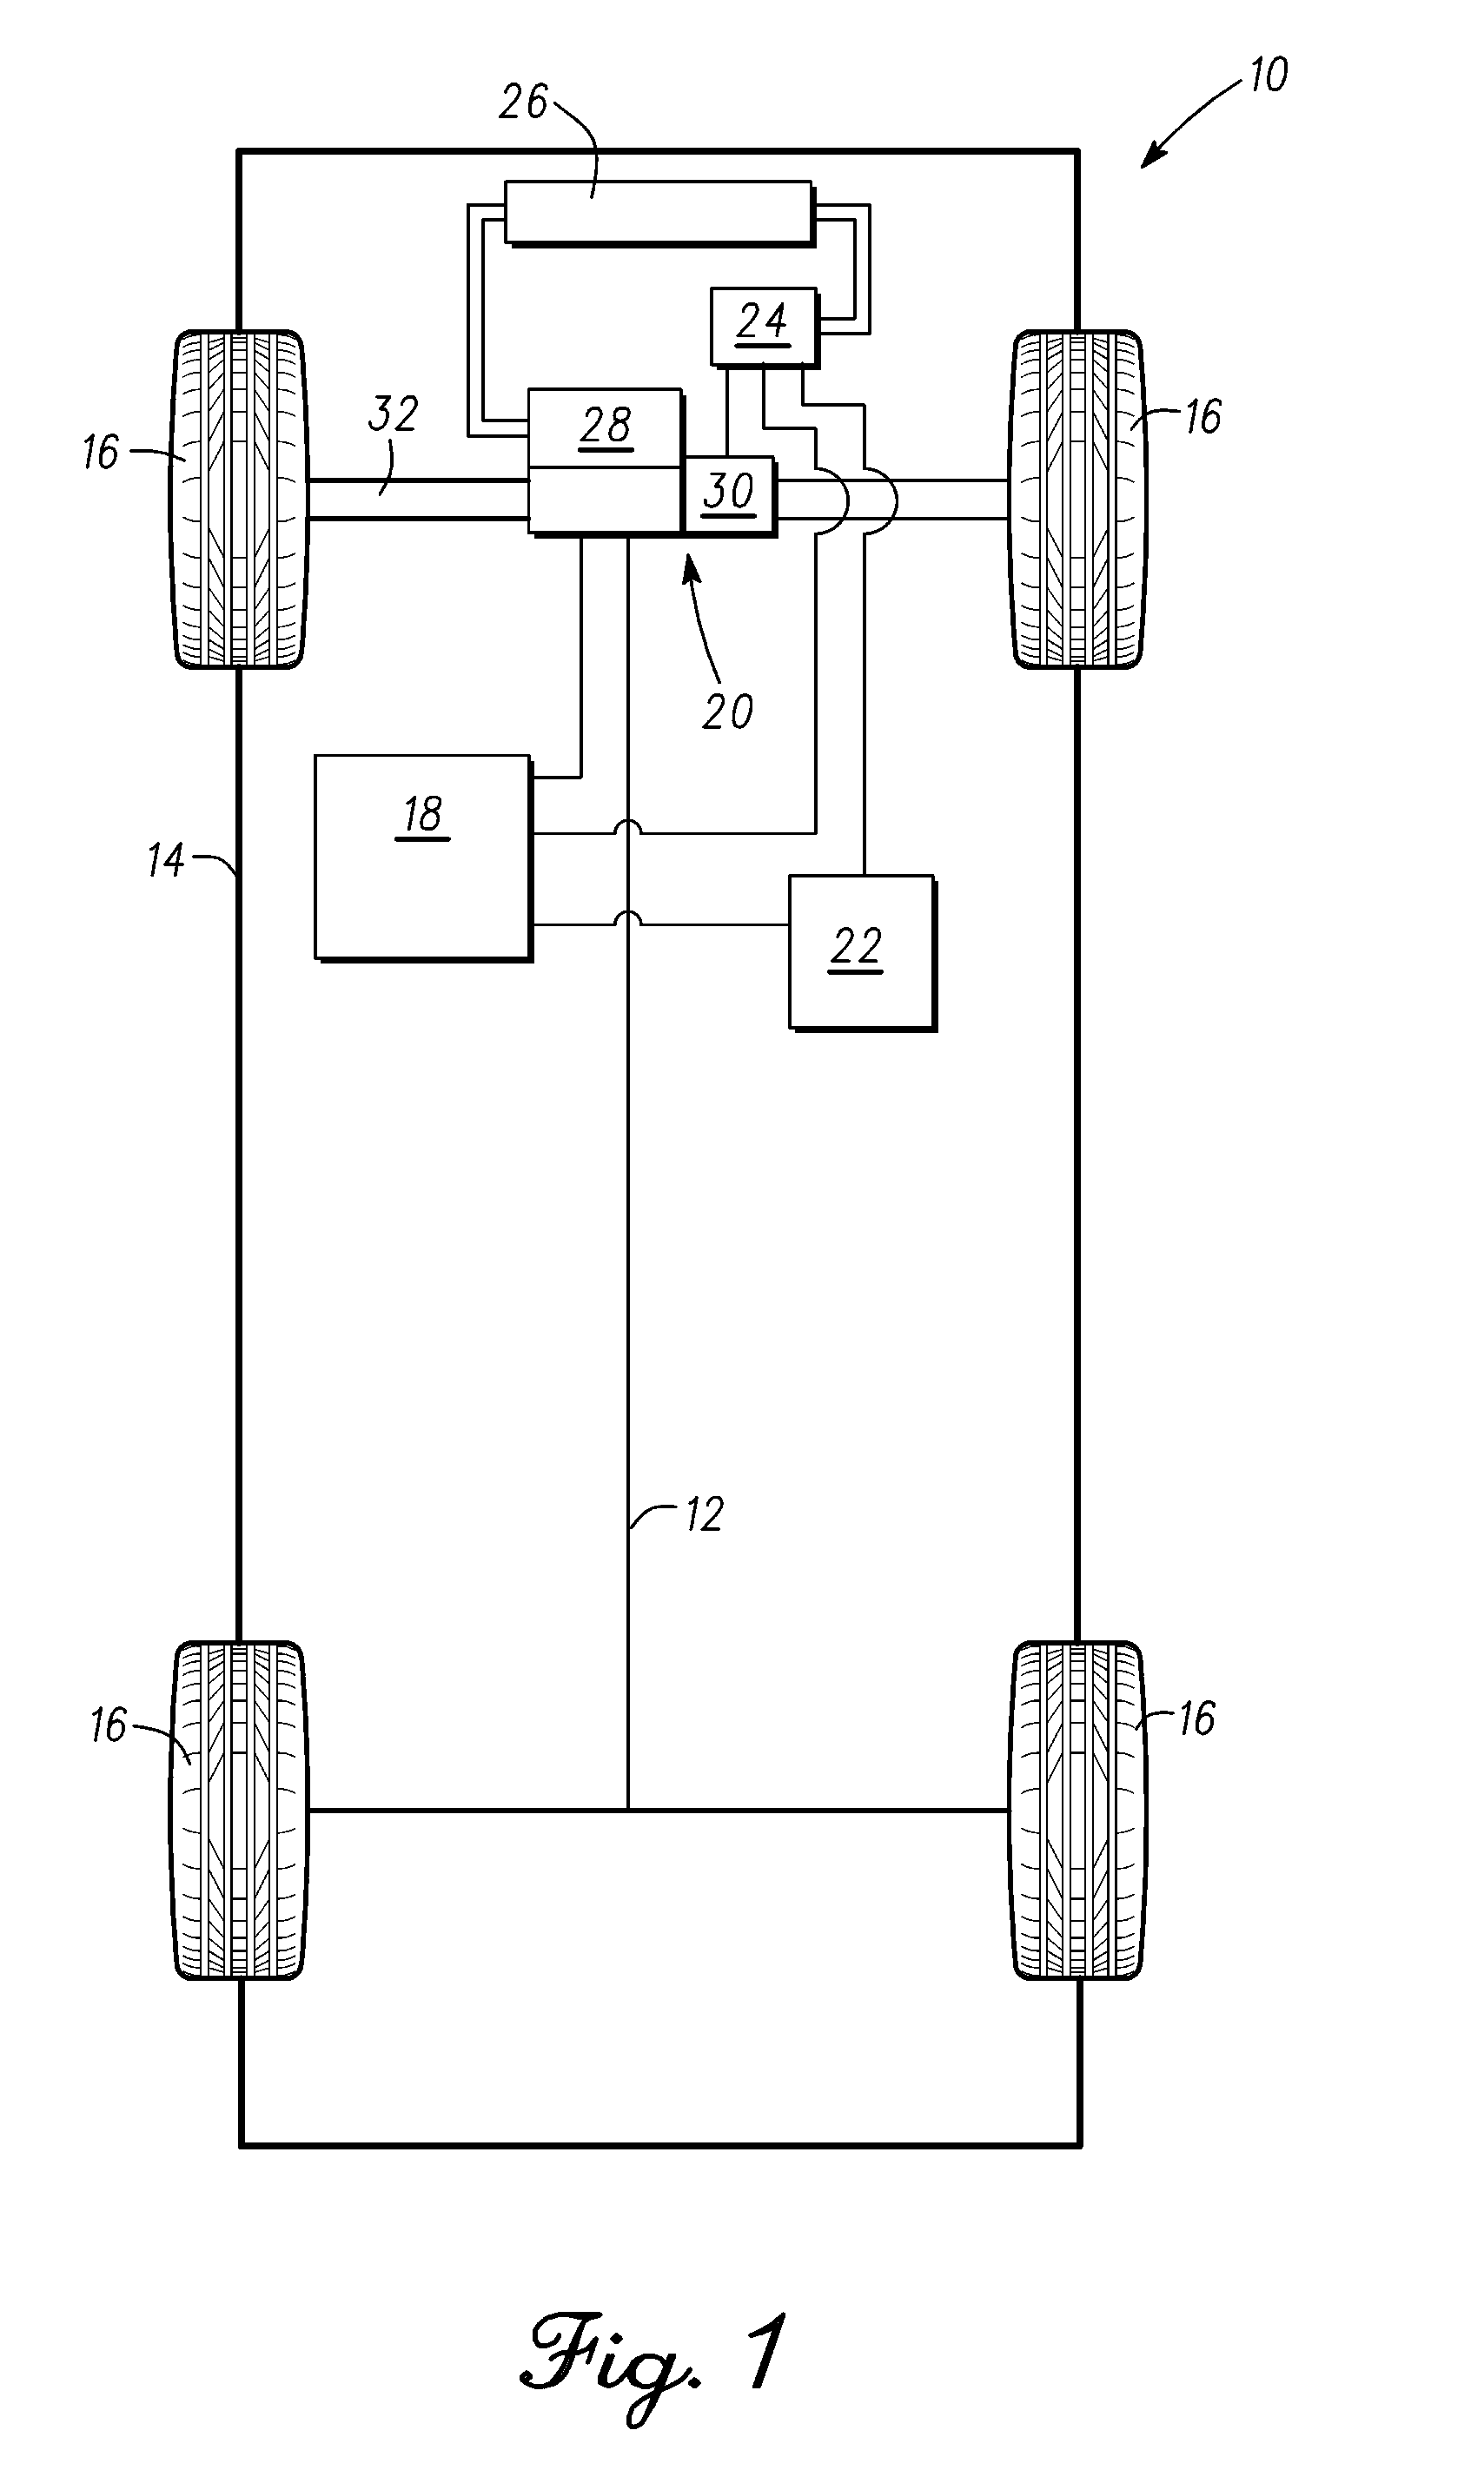 Method and system for testing electric automotive drive systems